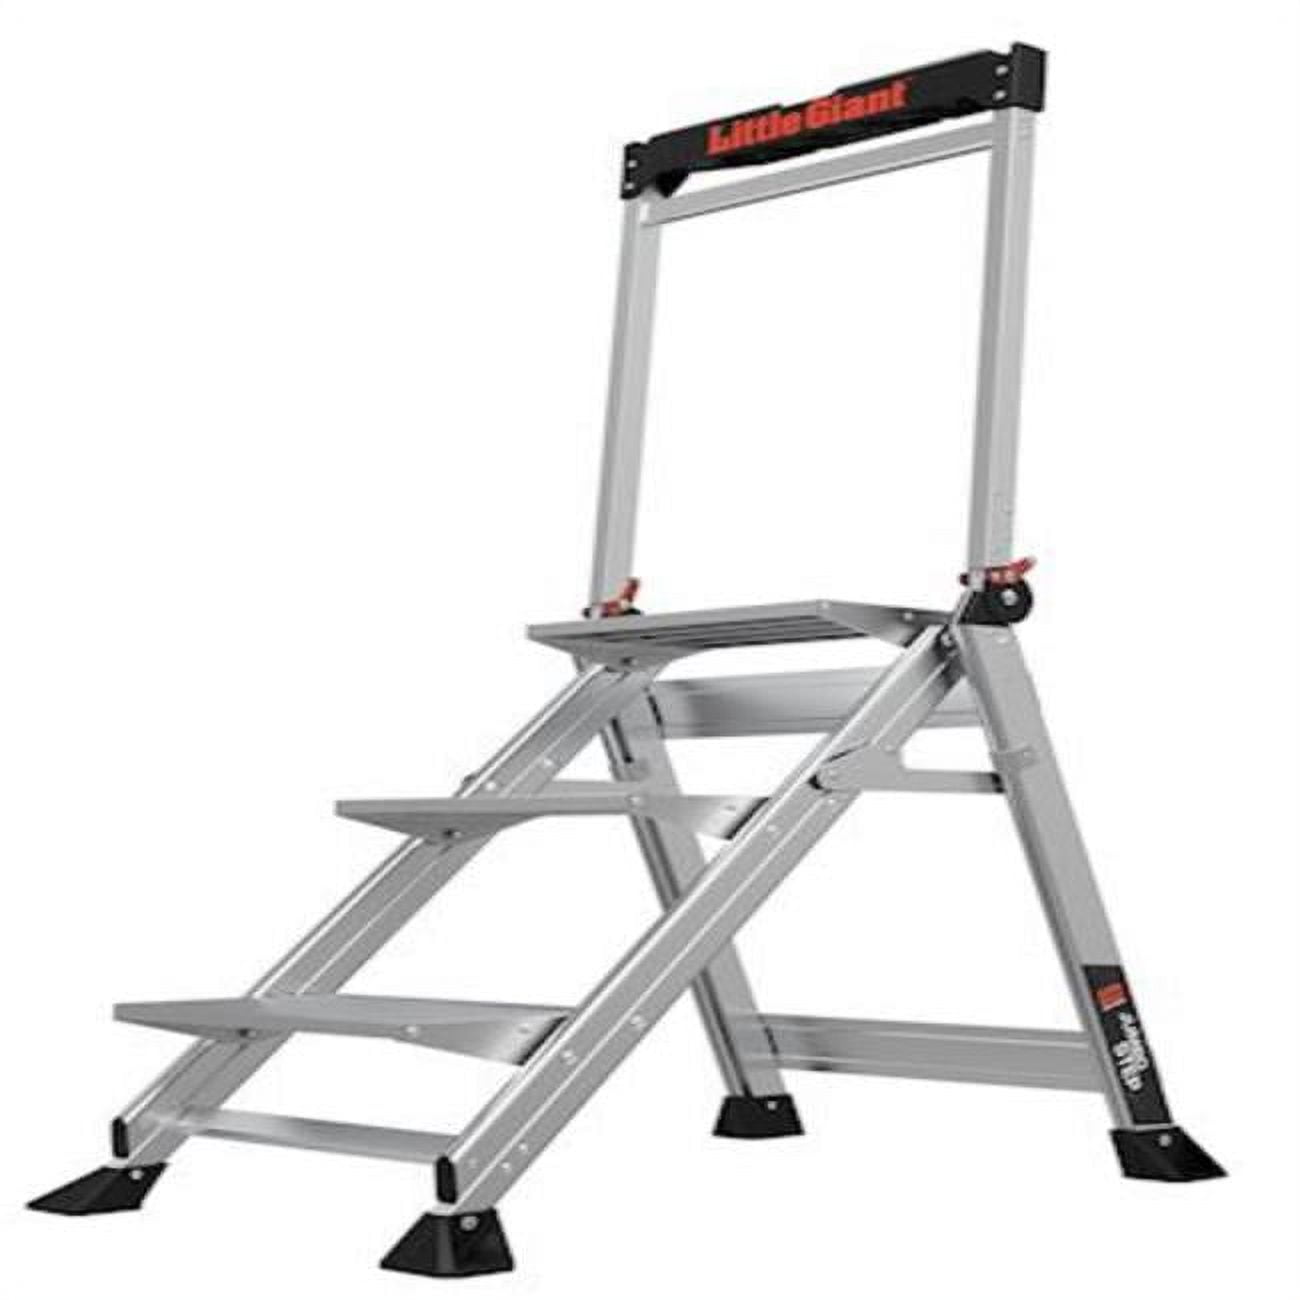 UPC 096764119300 product image for 1009976 375 lbs 3 ft. x 26 in. Aluminum Step Ladder for Type IAA | upcitemdb.com